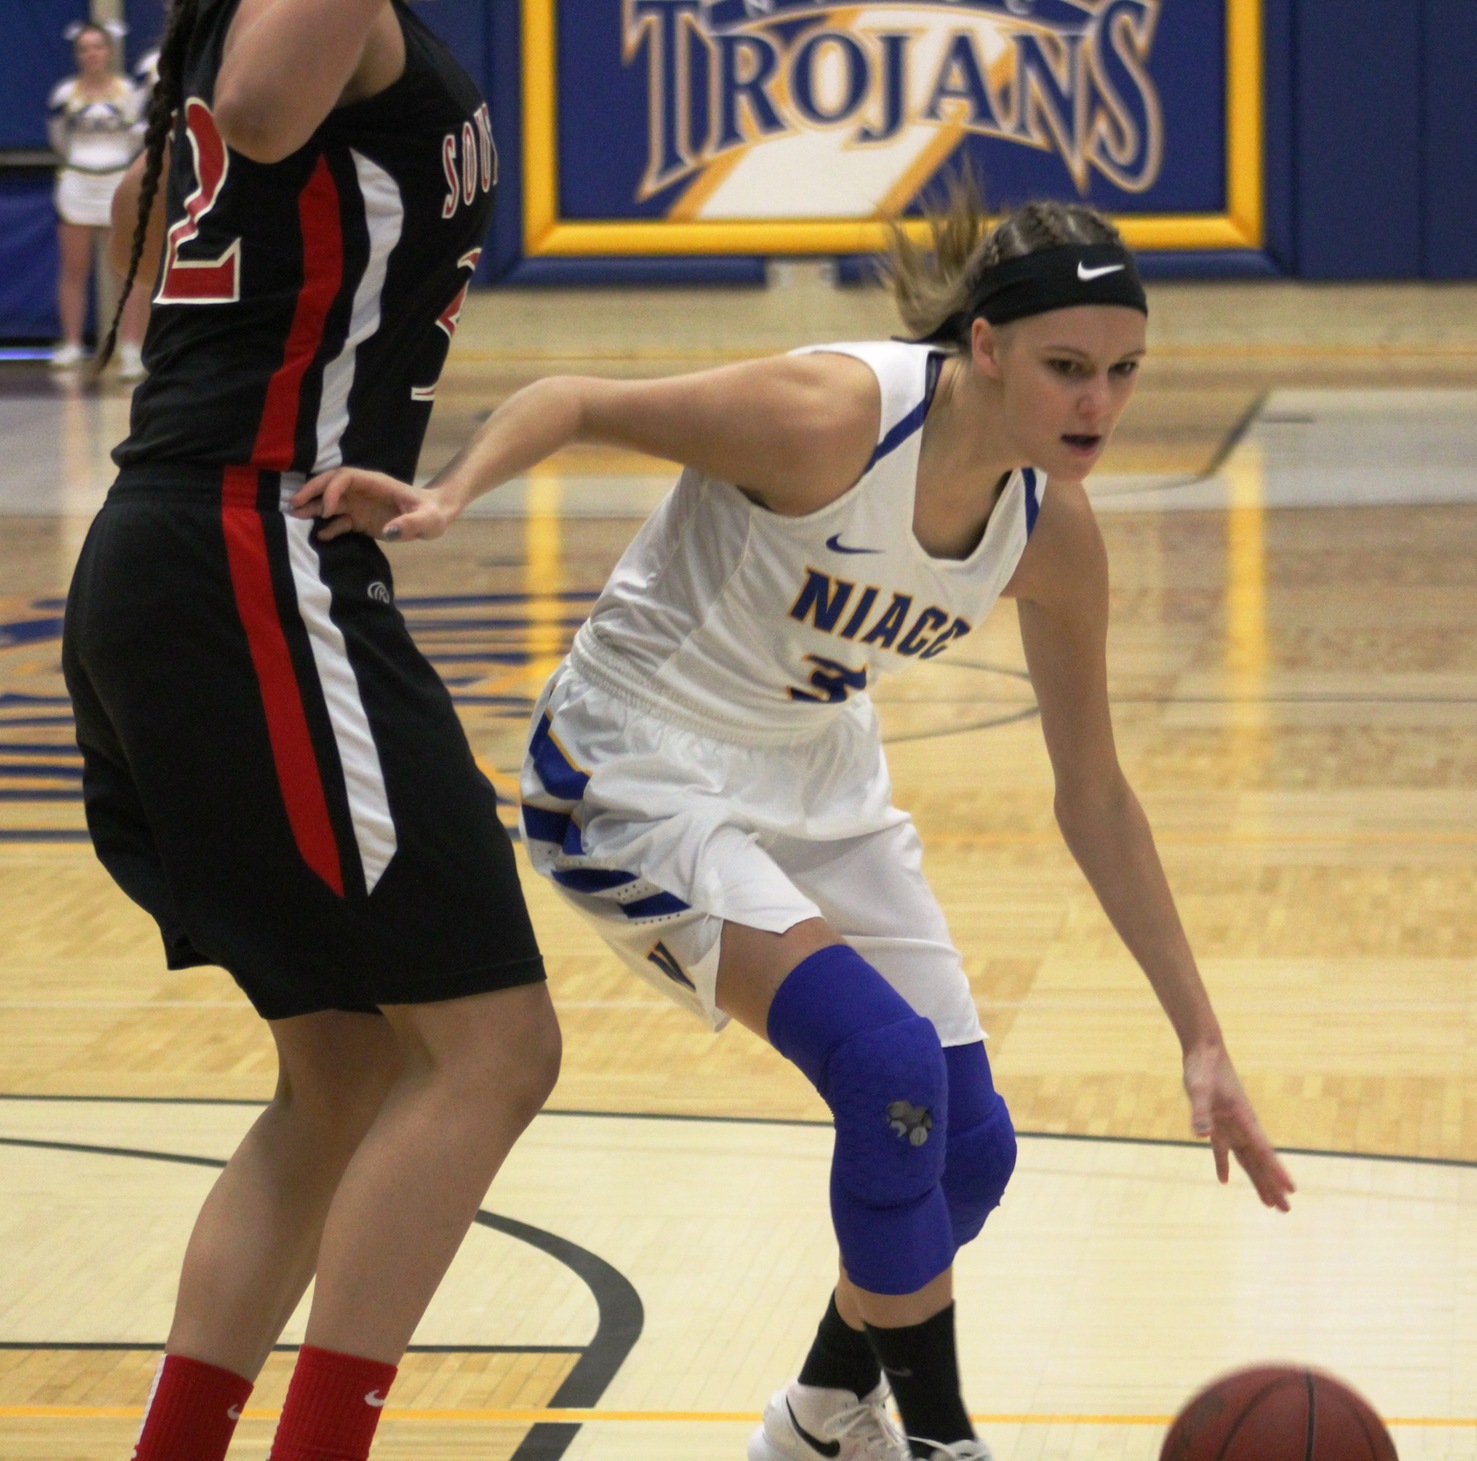 NIACC's Taylor Laabs was selected as the ICCAC women's basketball player of the week for week of Jan. 8-14.